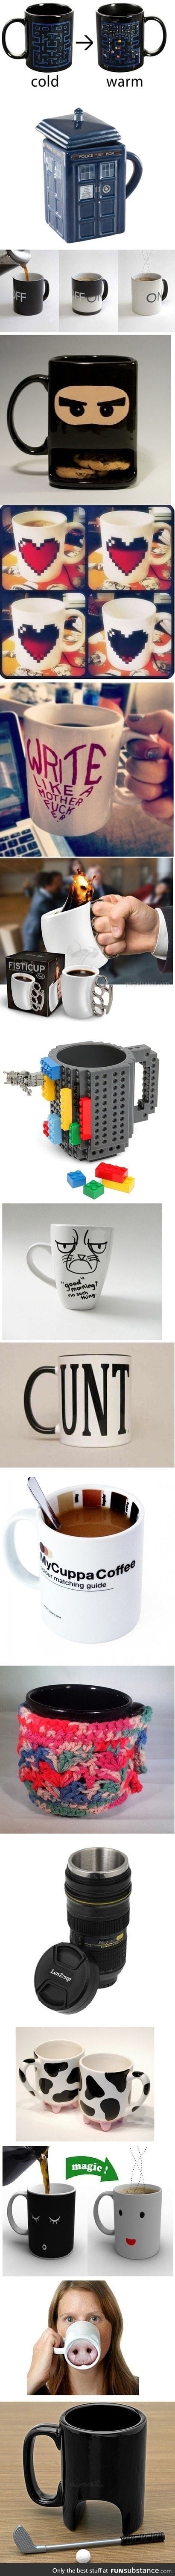 Awesome cups